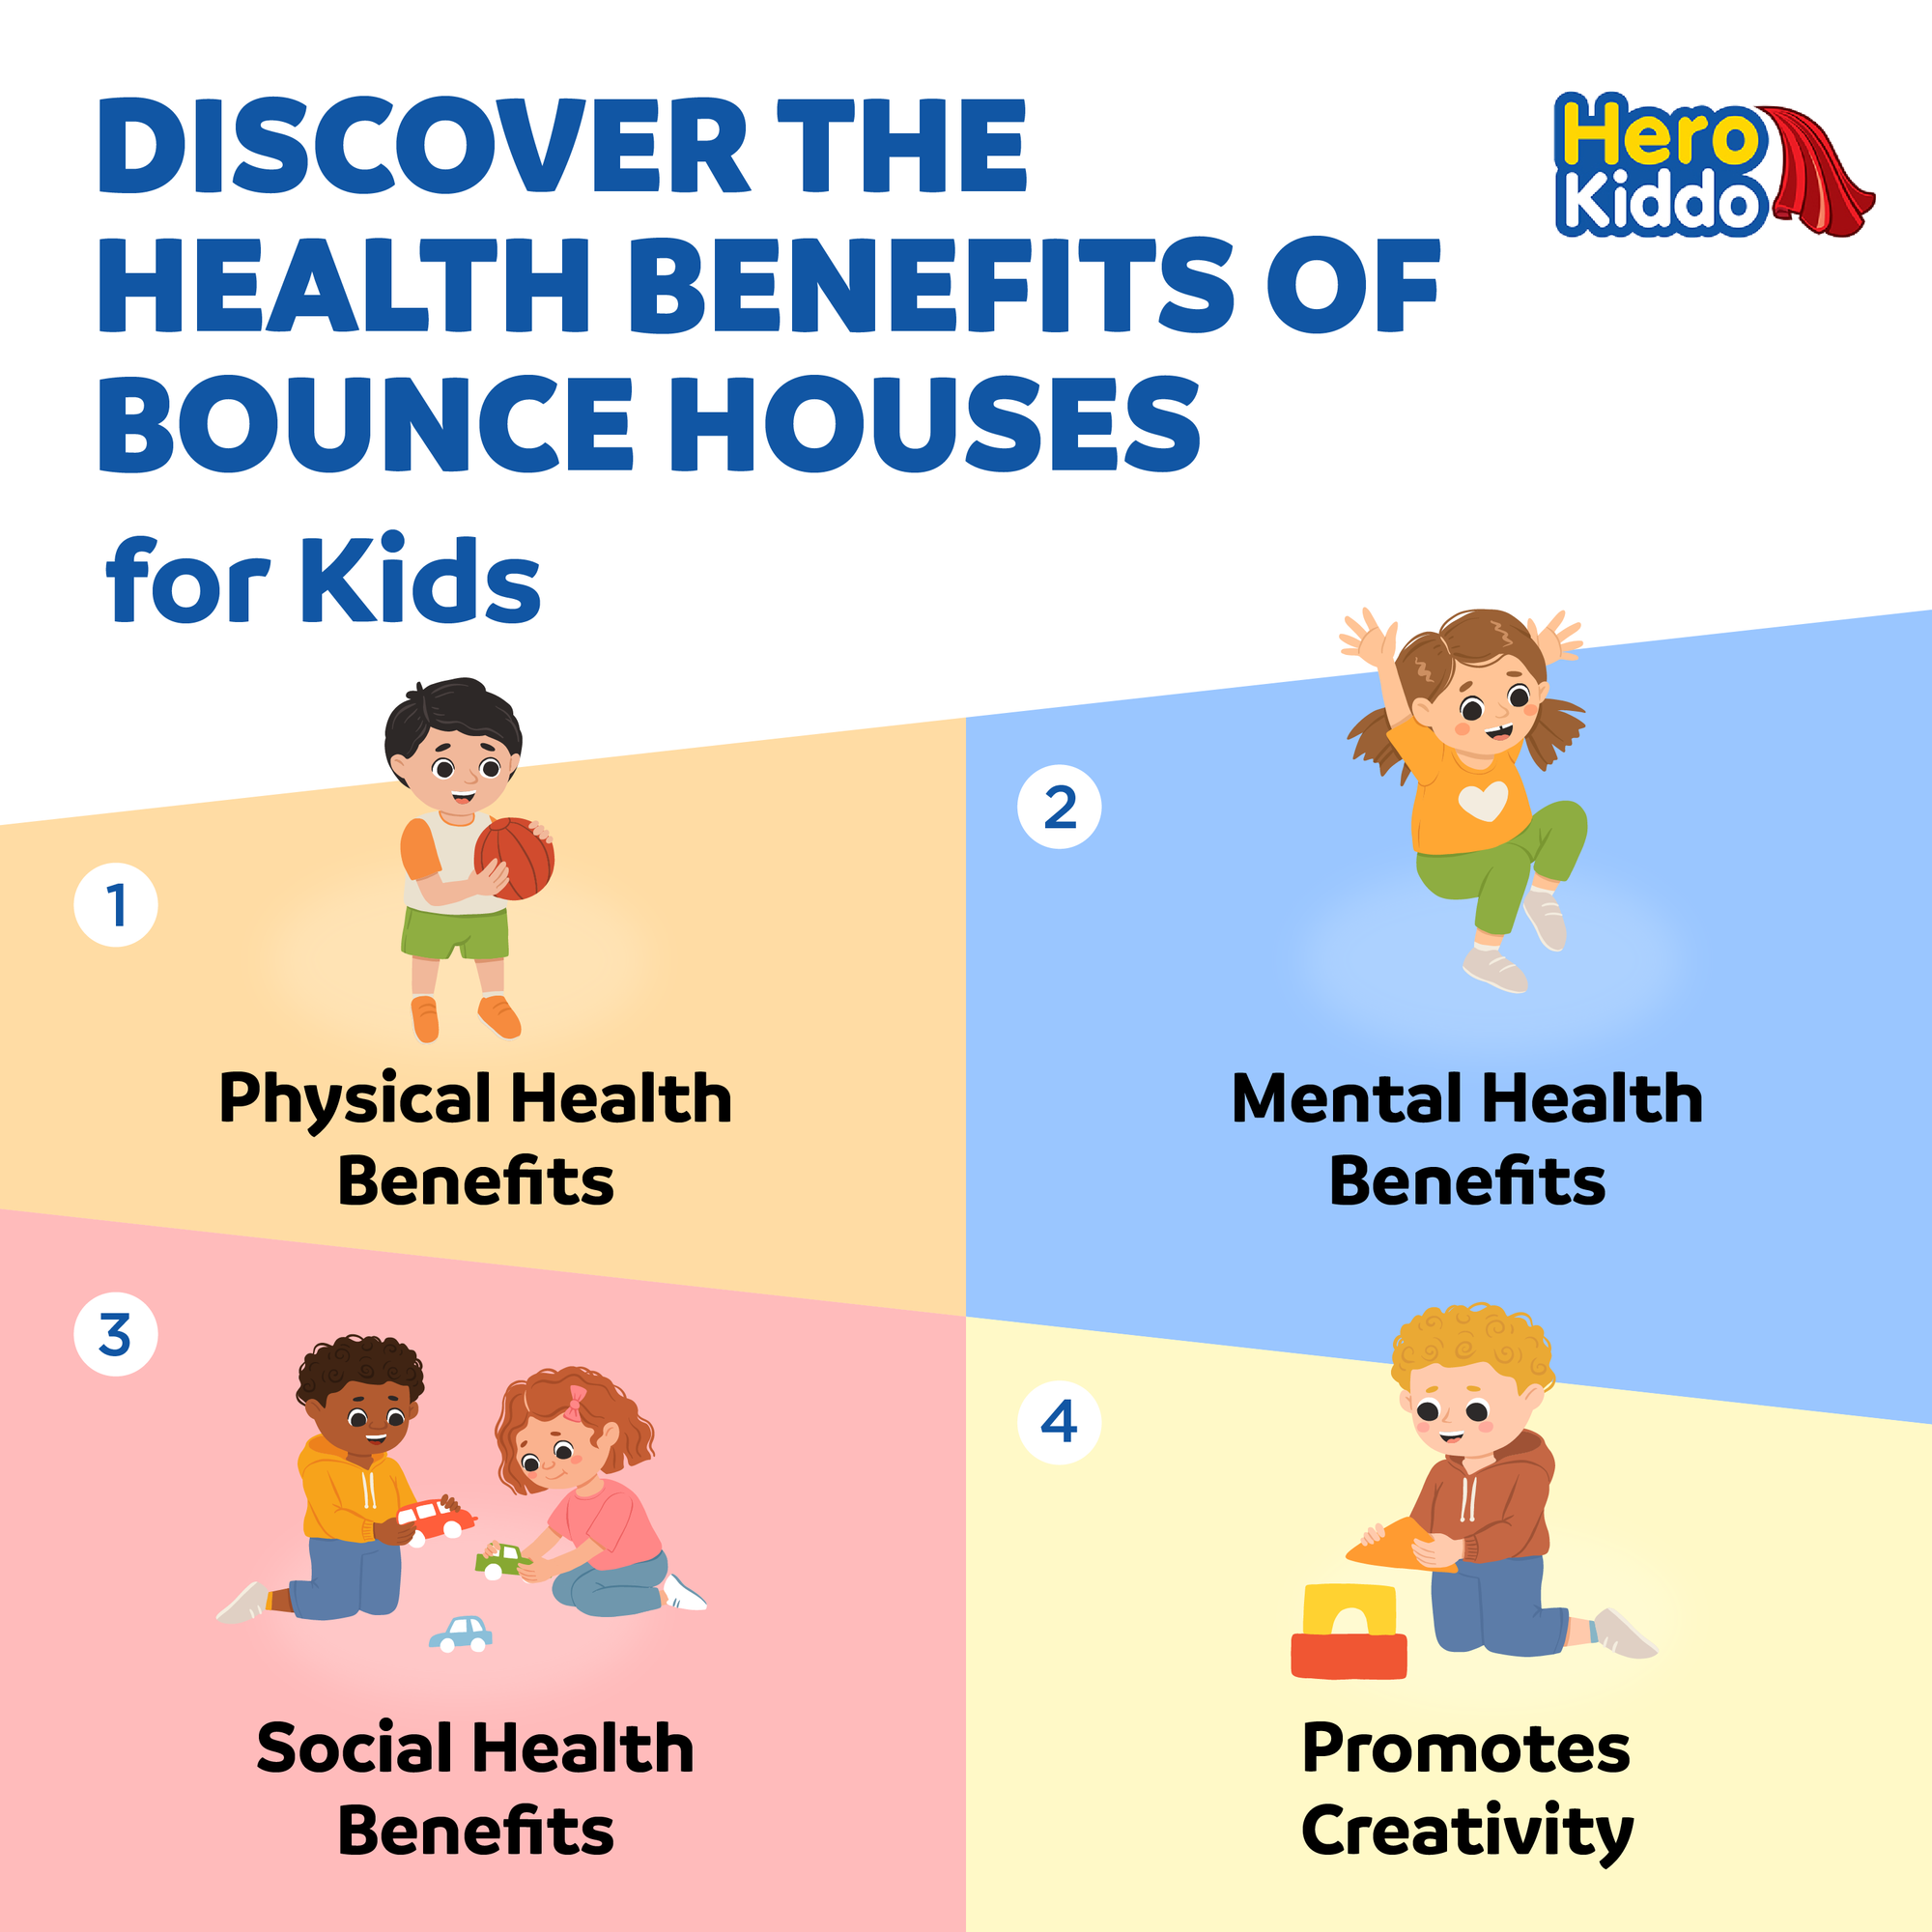 health benefits of bounce houses for kids inflatables boy girl social health physical health mental health for kids creativity children